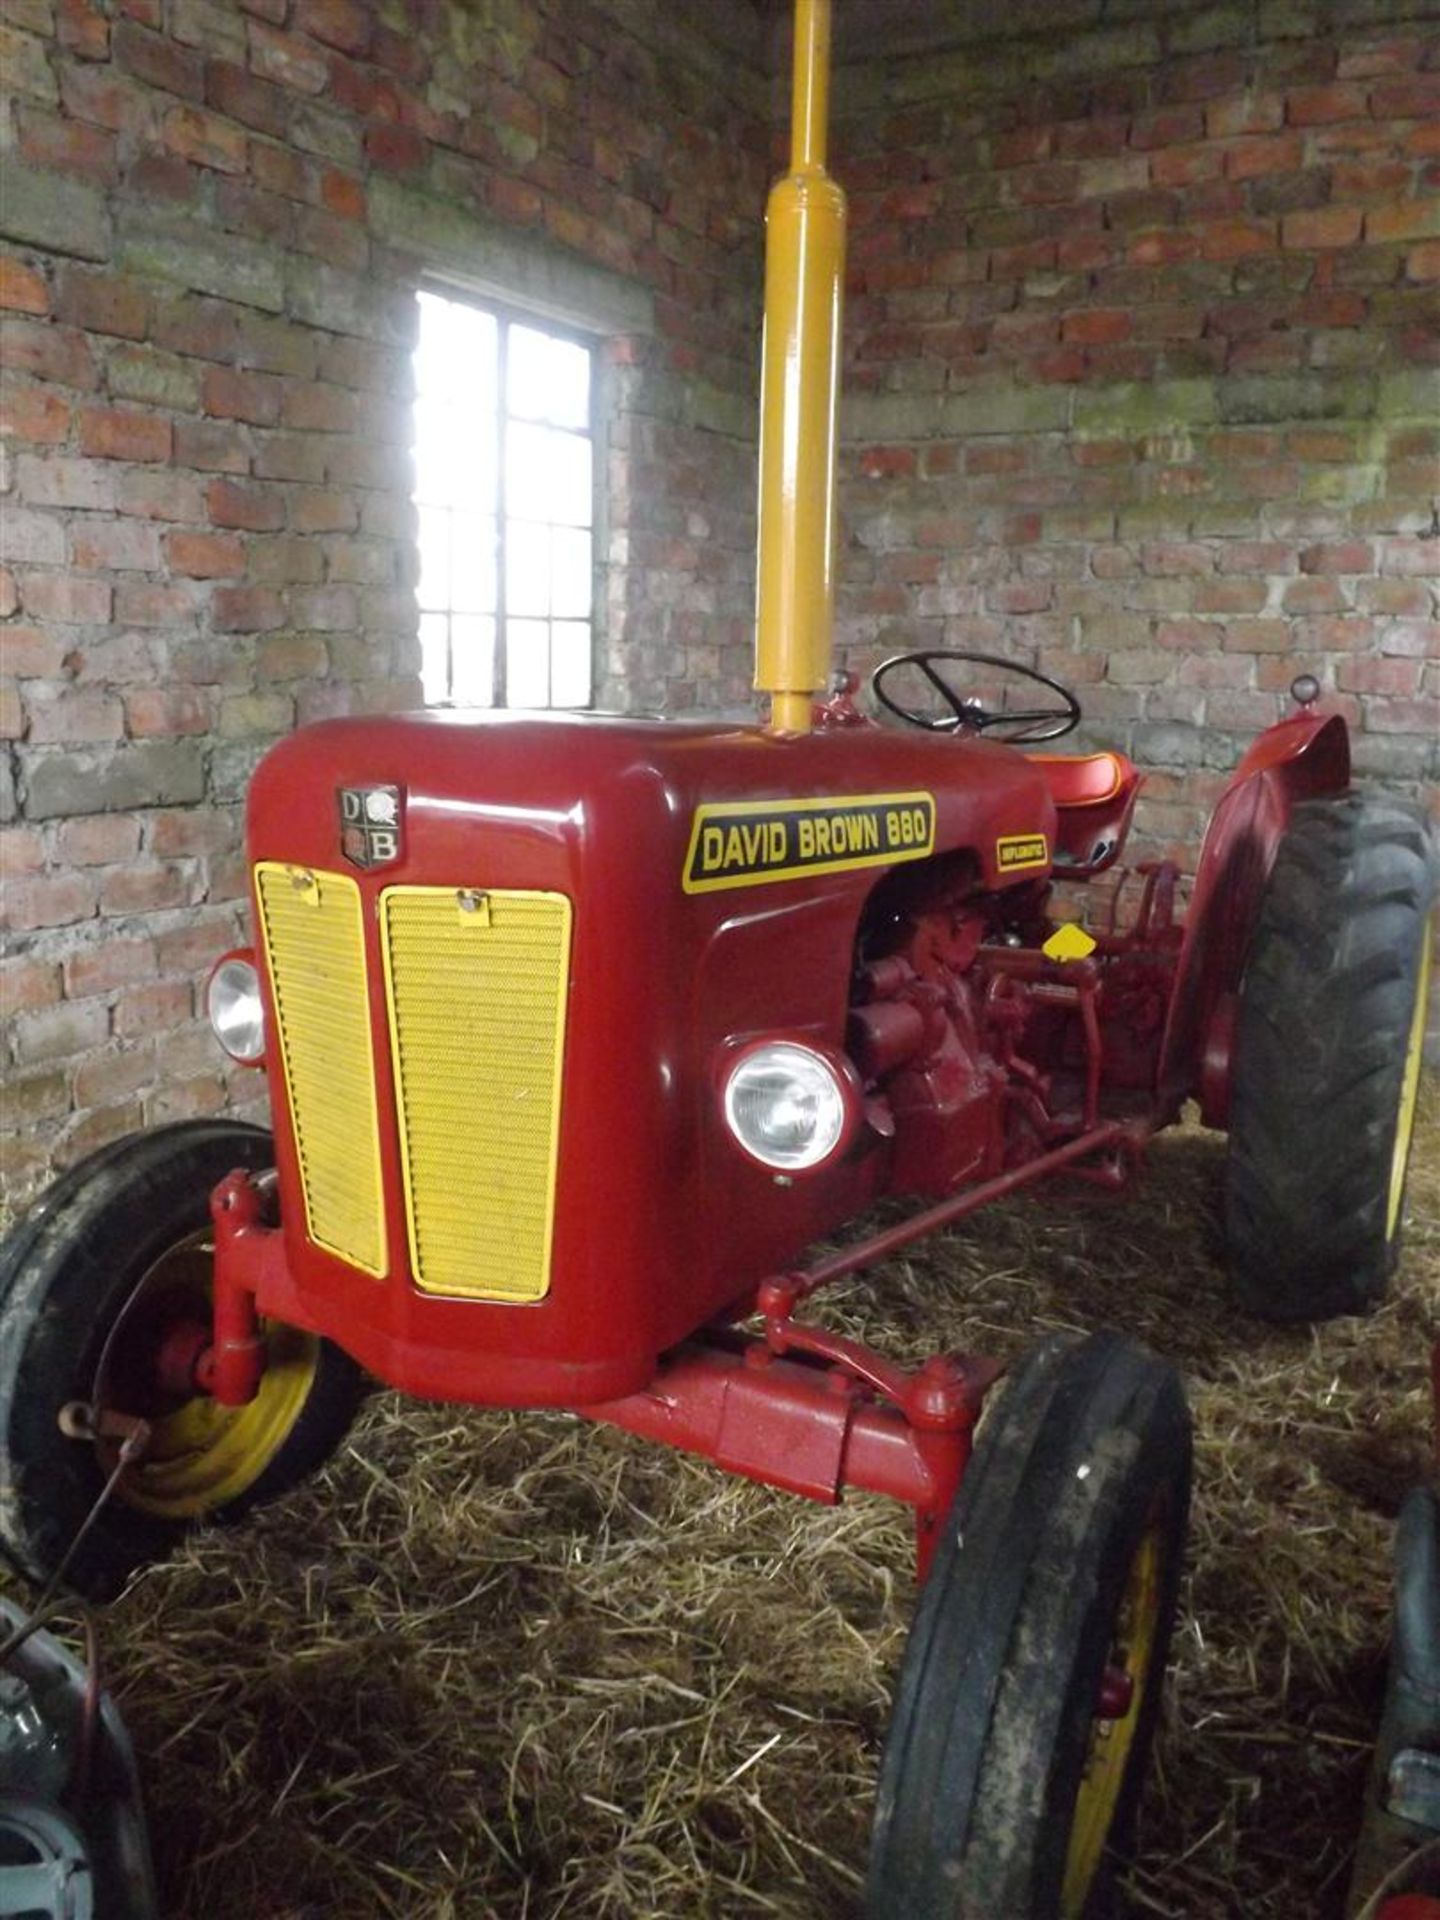 DAVID BROWN 880 Implematic diesel TRACTOR Described in good condition the tractor is reported to